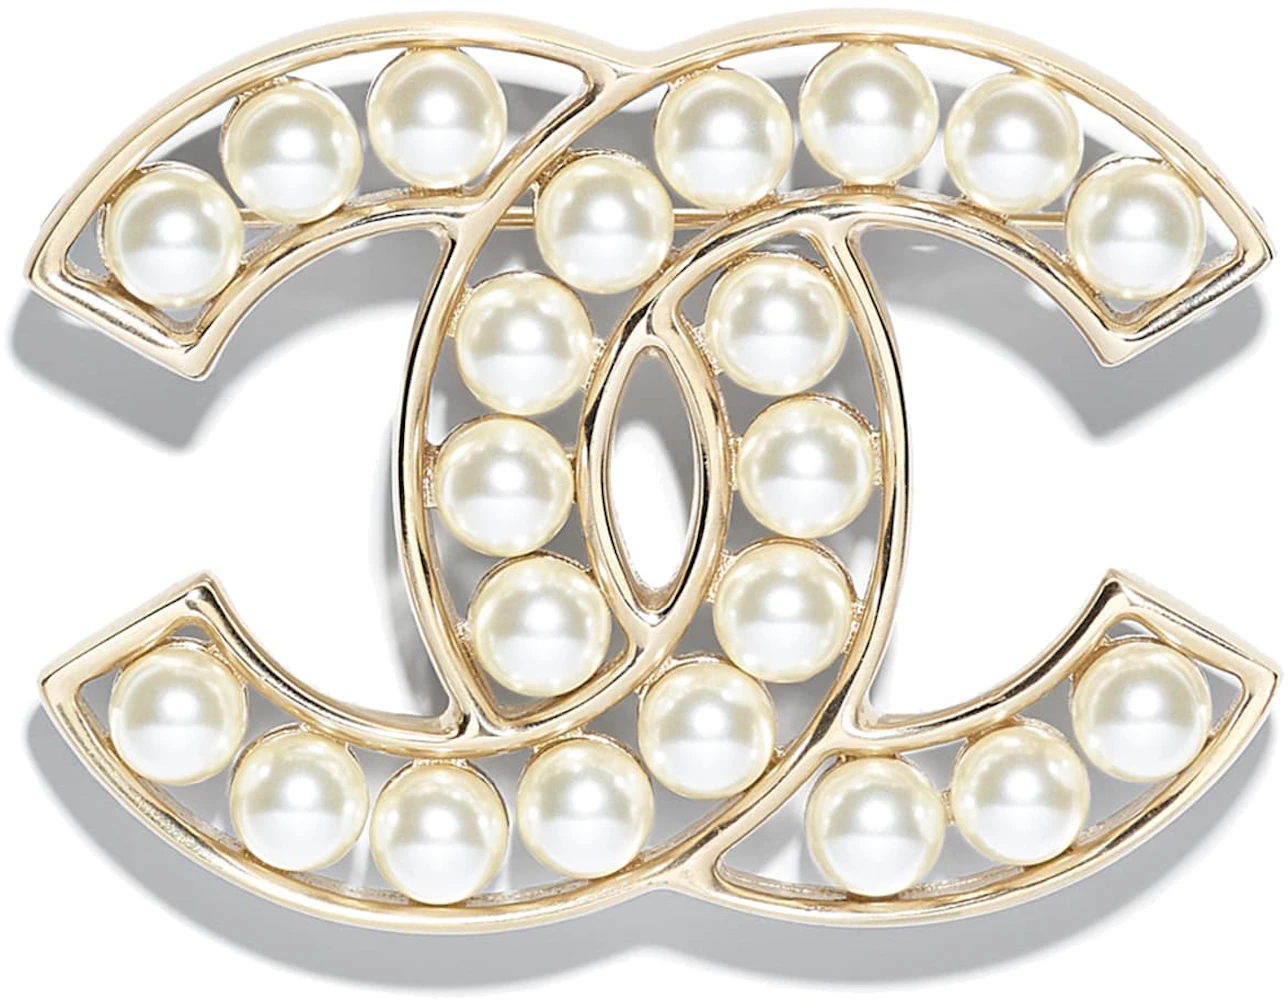 19 Brooch Gold/White in Metal/Glass US